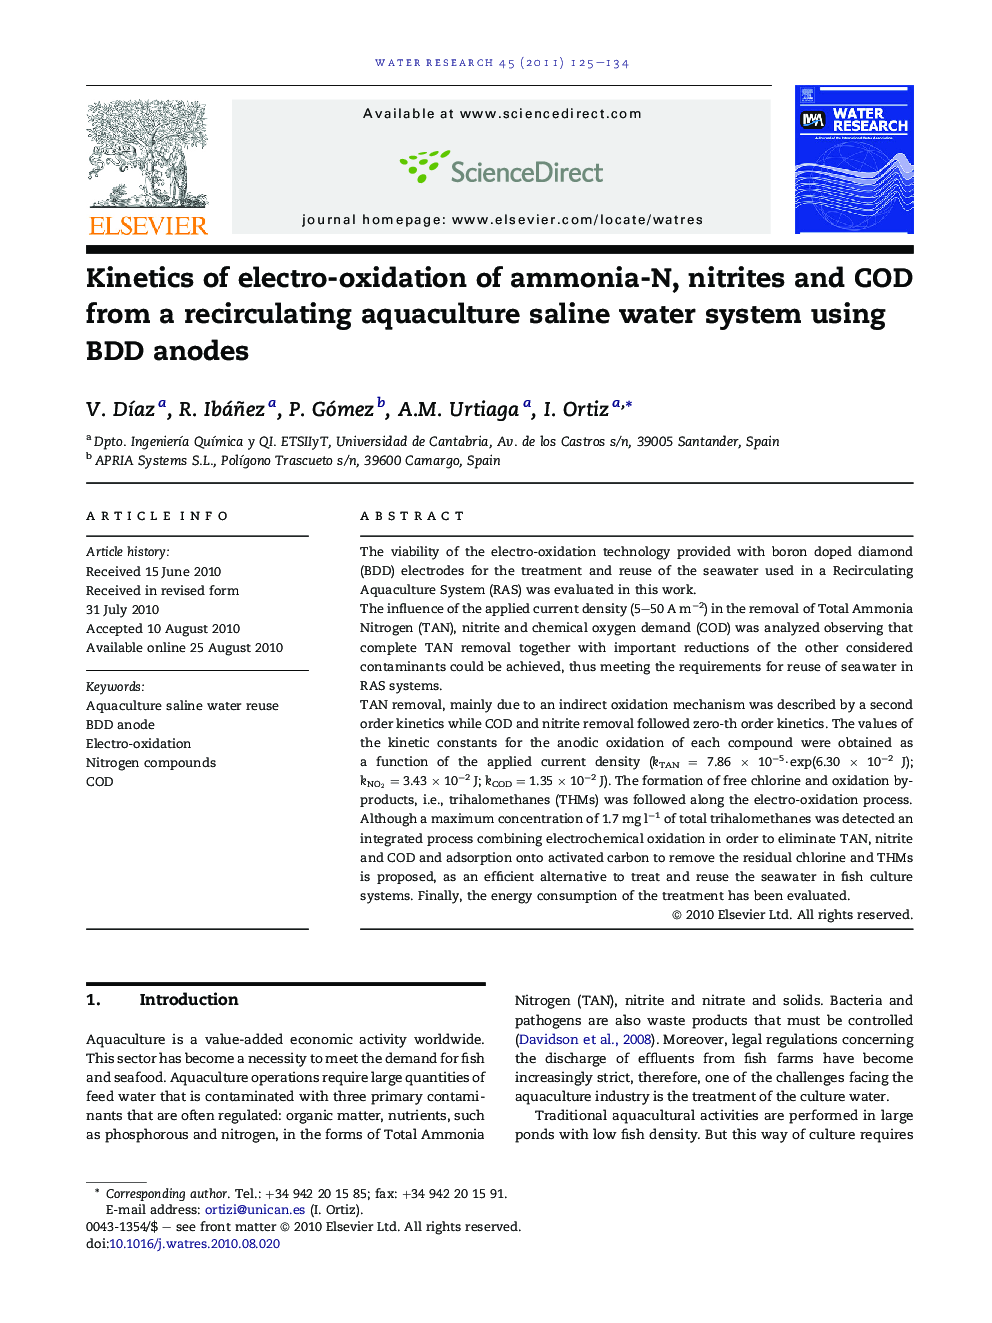 Kinetics of electro-oxidation of ammonia-N, nitrites and COD from a recirculating aquaculture saline water system using BDD anodes